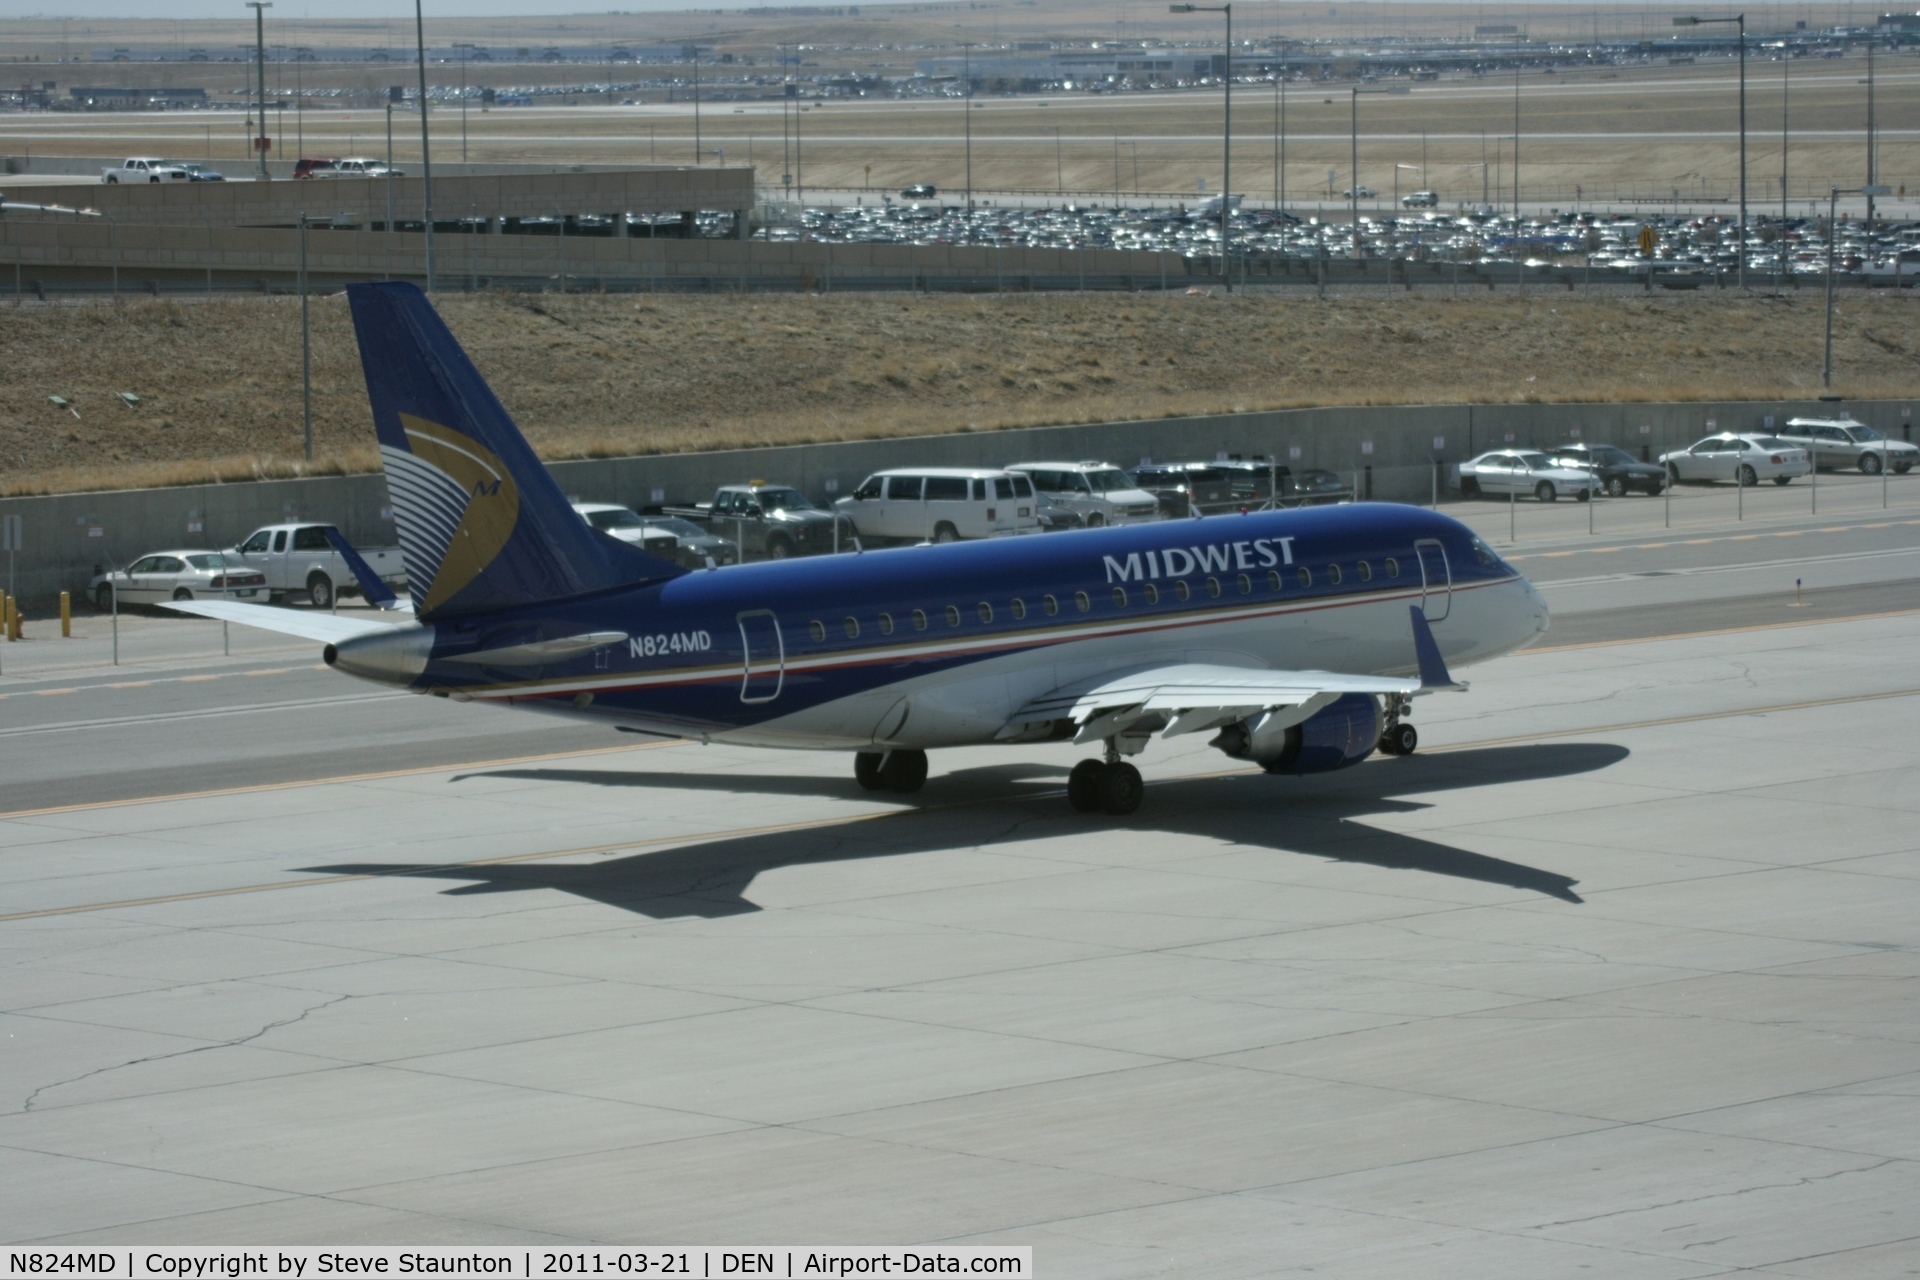 N824MD, 2005 Embraer 170SU (ERJ-170-100SU) C/N 17000045, Taken at Denver International Airport, in March 2011 whilst on an Aeroprint Aviation tour